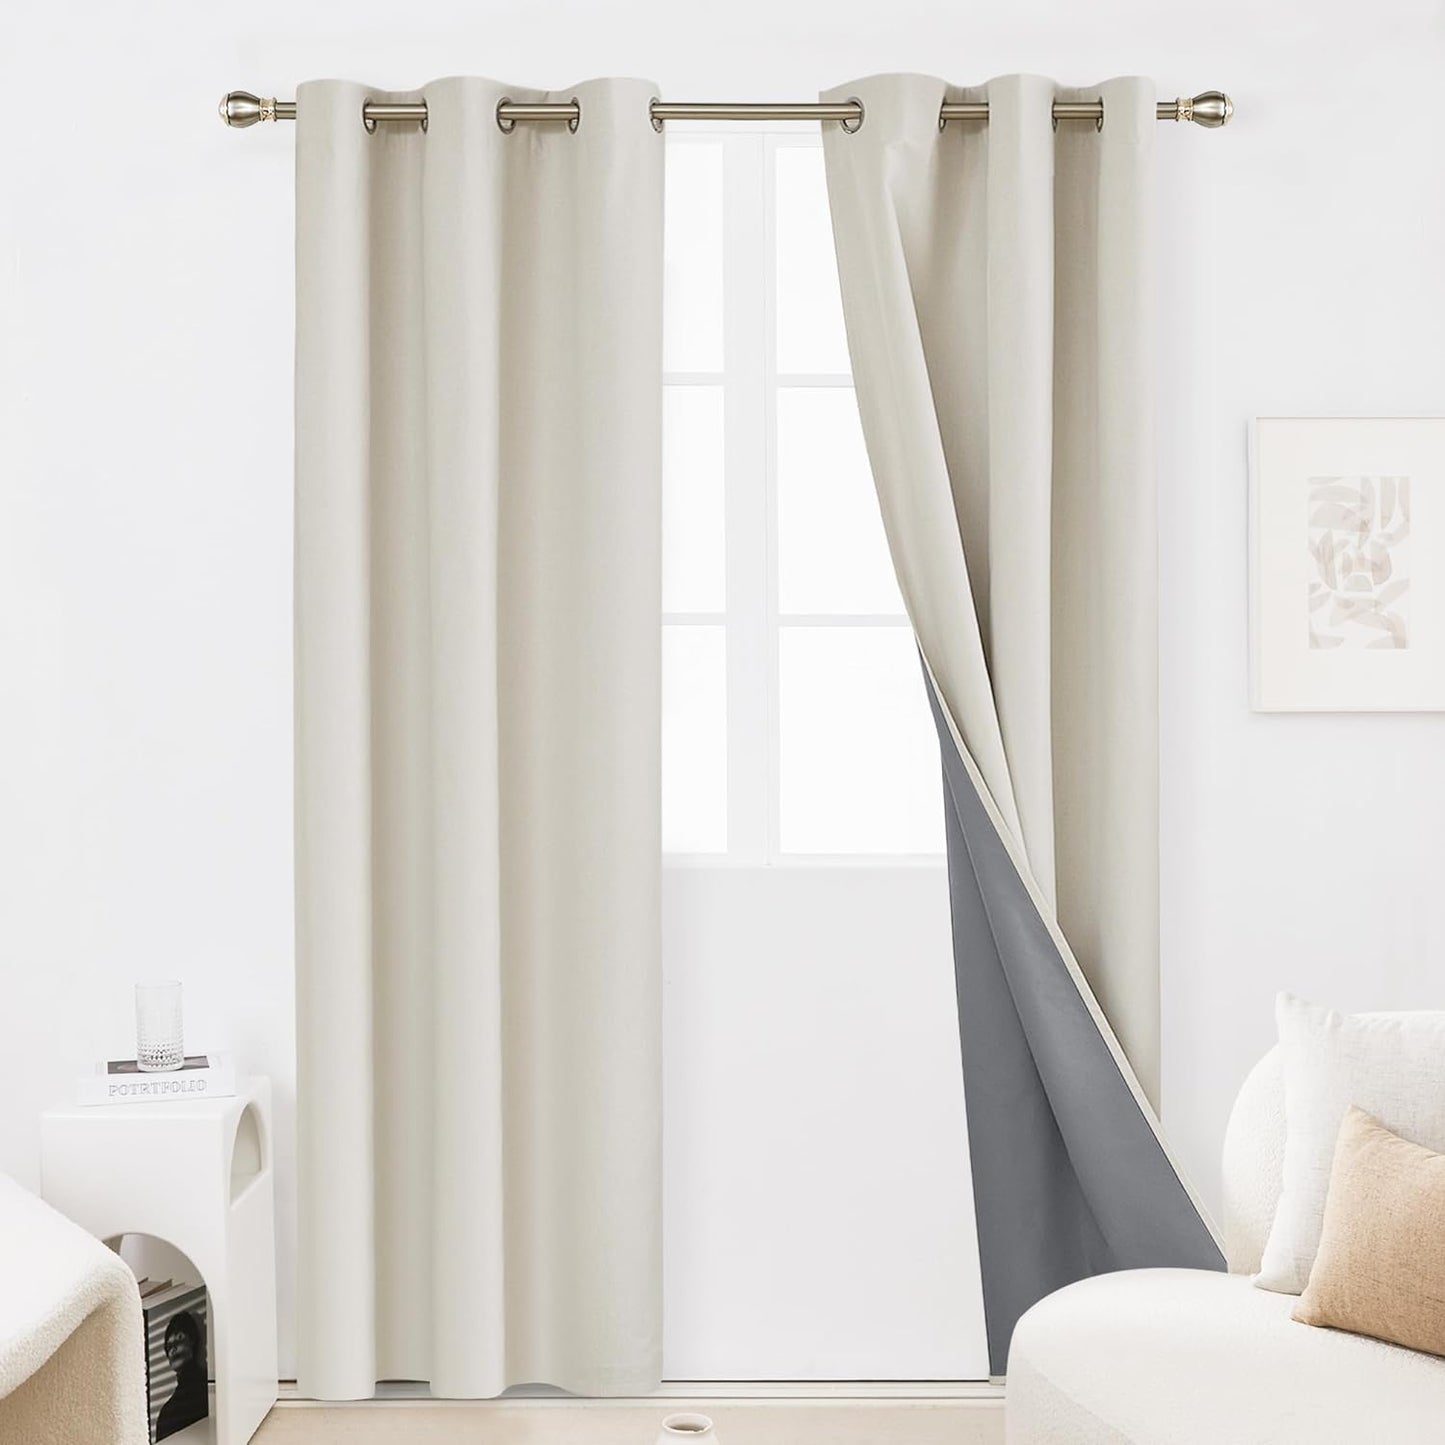 Deconovo Linen Blackout Curtains 84 Inch Length Set of 2, Thermal Curtain Drapes with Grey Coating, Total Light Blocking Waterproof Curtains for Indoor/Outdoor (Light Grey, 52W X 84L Inch)  Deconovo Cream 42X95 Inches 